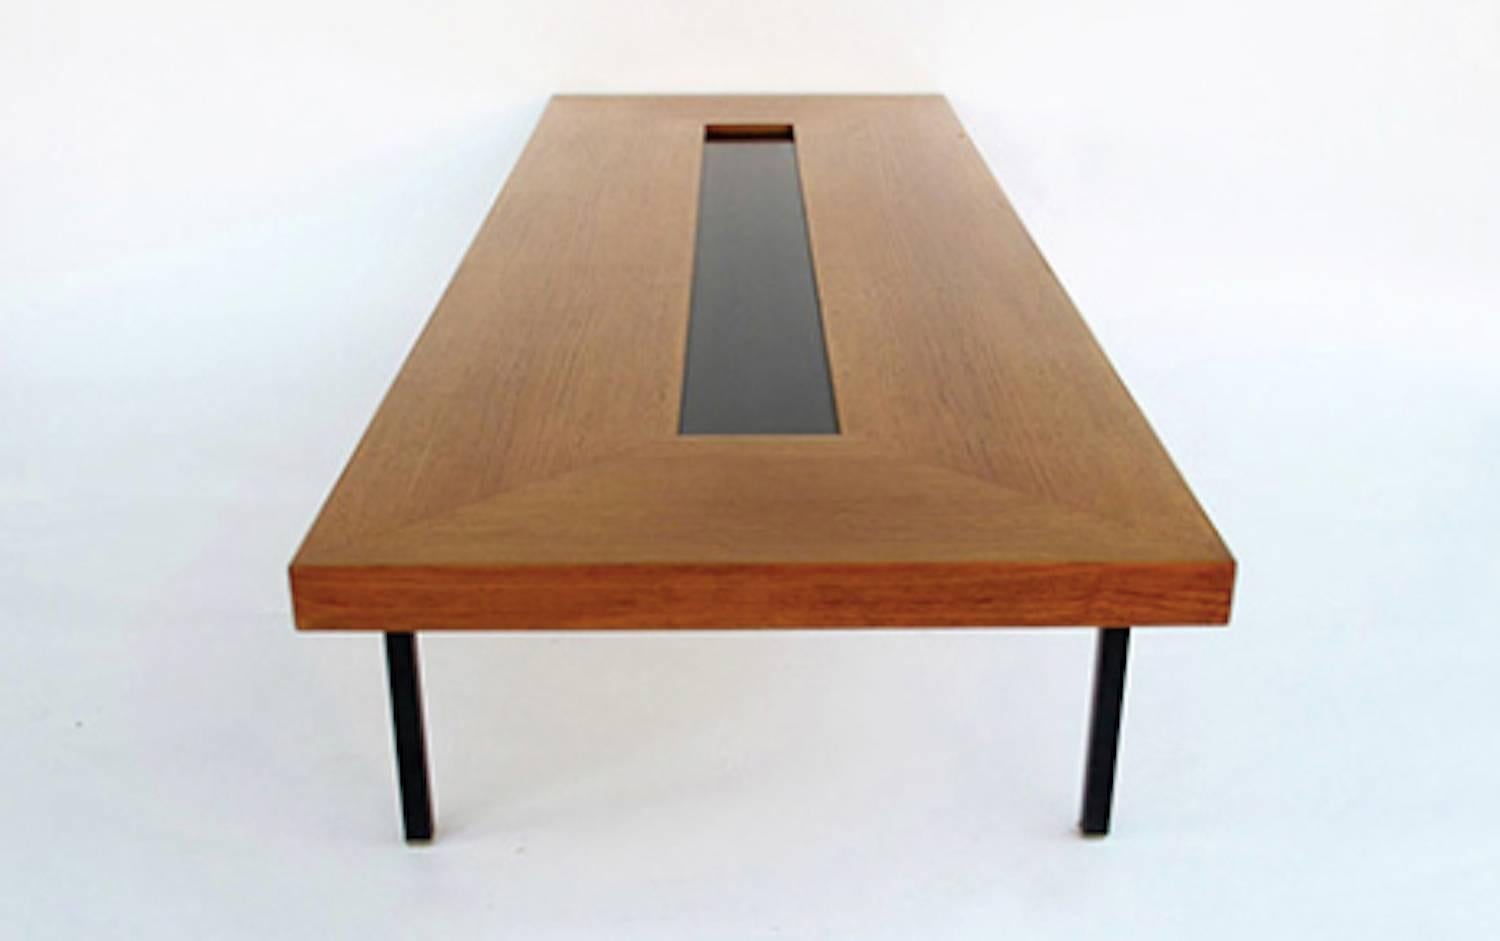 Wonderful and very rare extra large coffee table by Antoine Philippon and Jacqueline Lecoq. Black laquered steel legs and teakwood top with black laquered inlay.

LOCATED IN HAMBURG